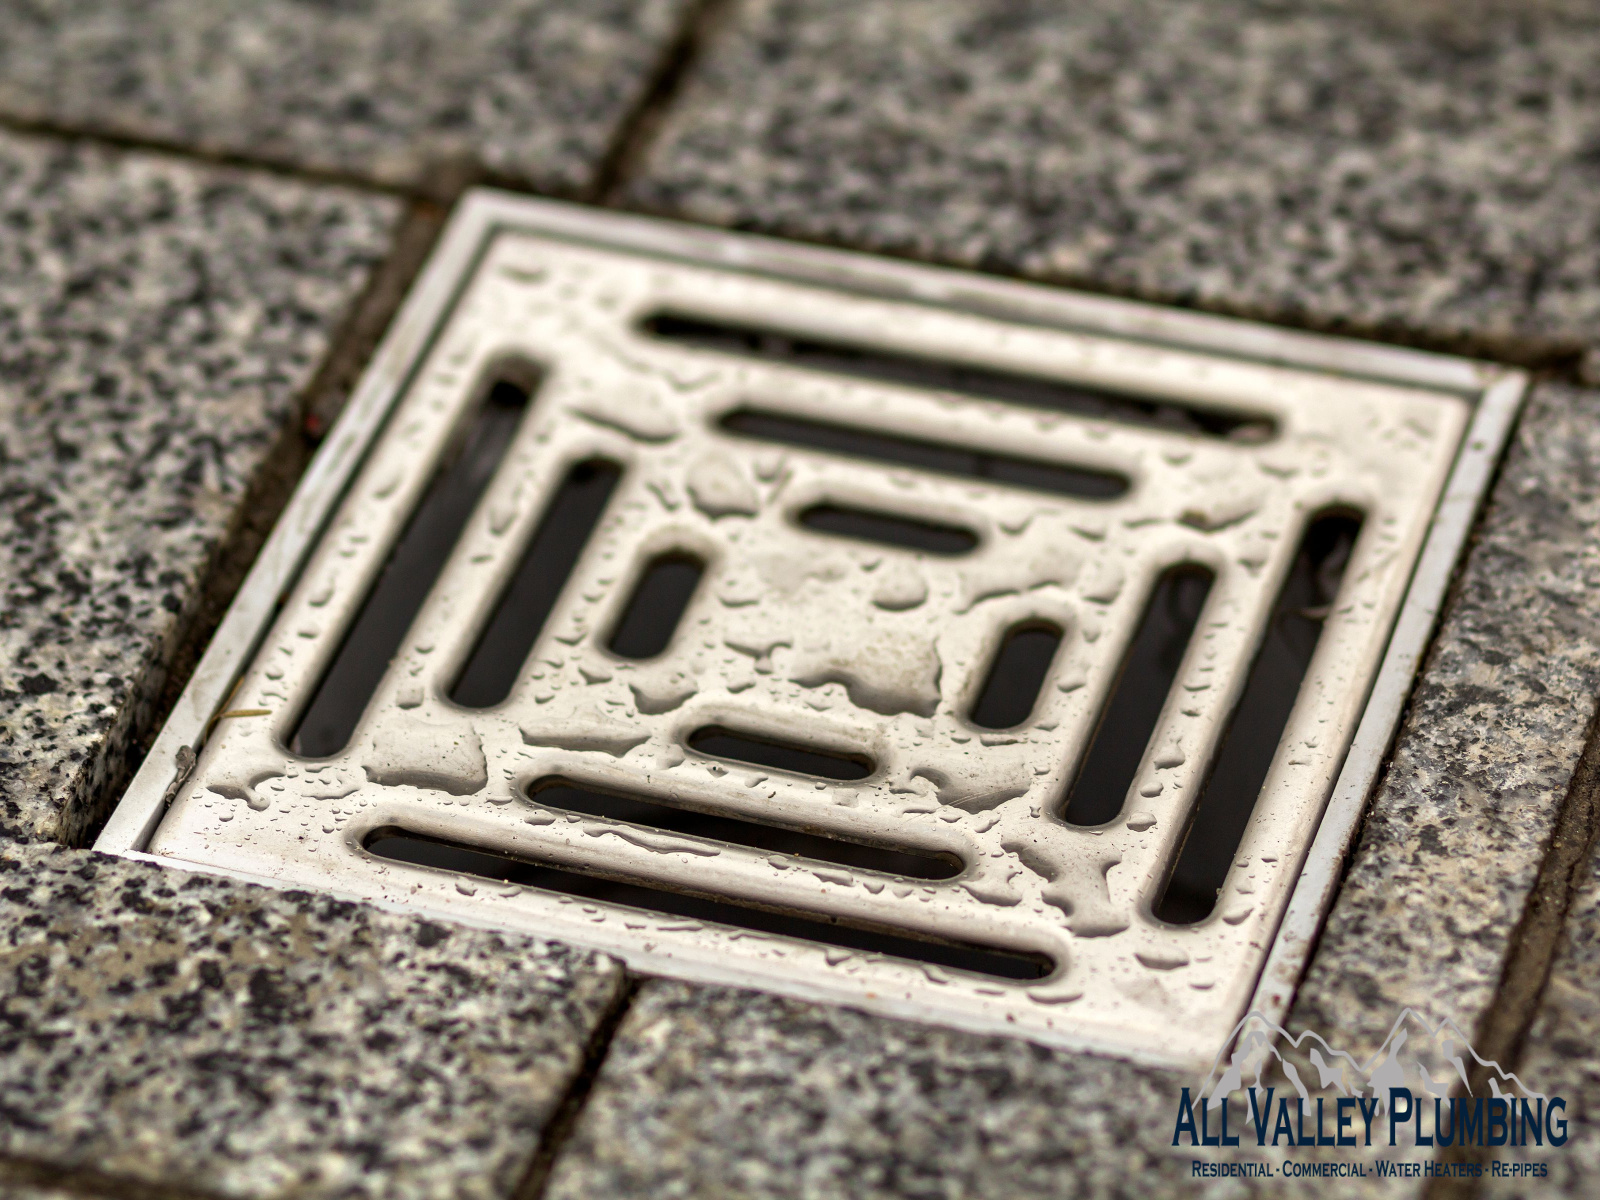 All Valley Plumbing Is Your Go-To Drain Tile Repair Or Replacement Team